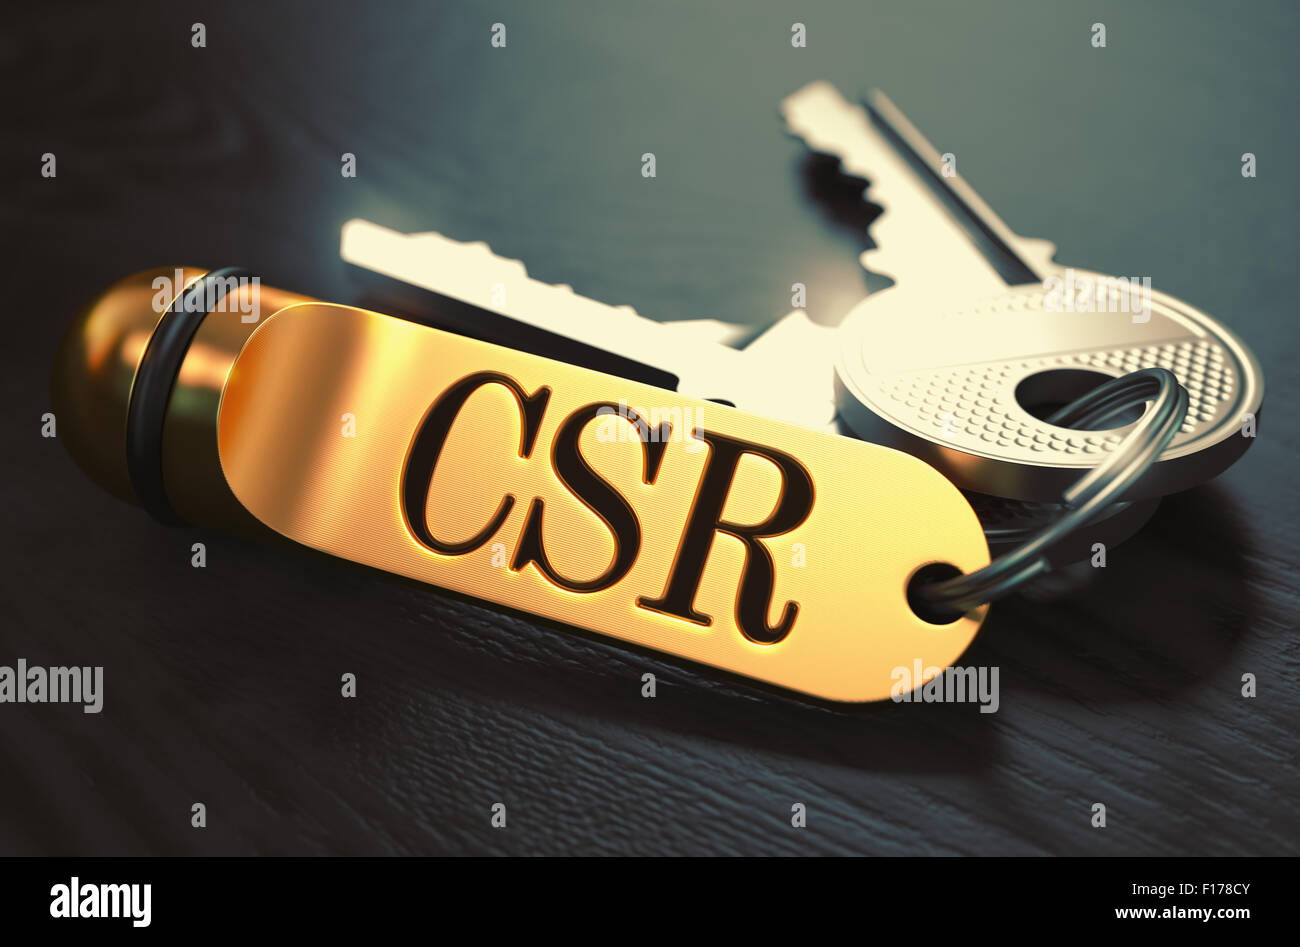 CSR - Certificate Signing Request - Bunch of Keys with Text on Golden Keychain. Black Wooden Background. Closeup View with Selec Stock Photo